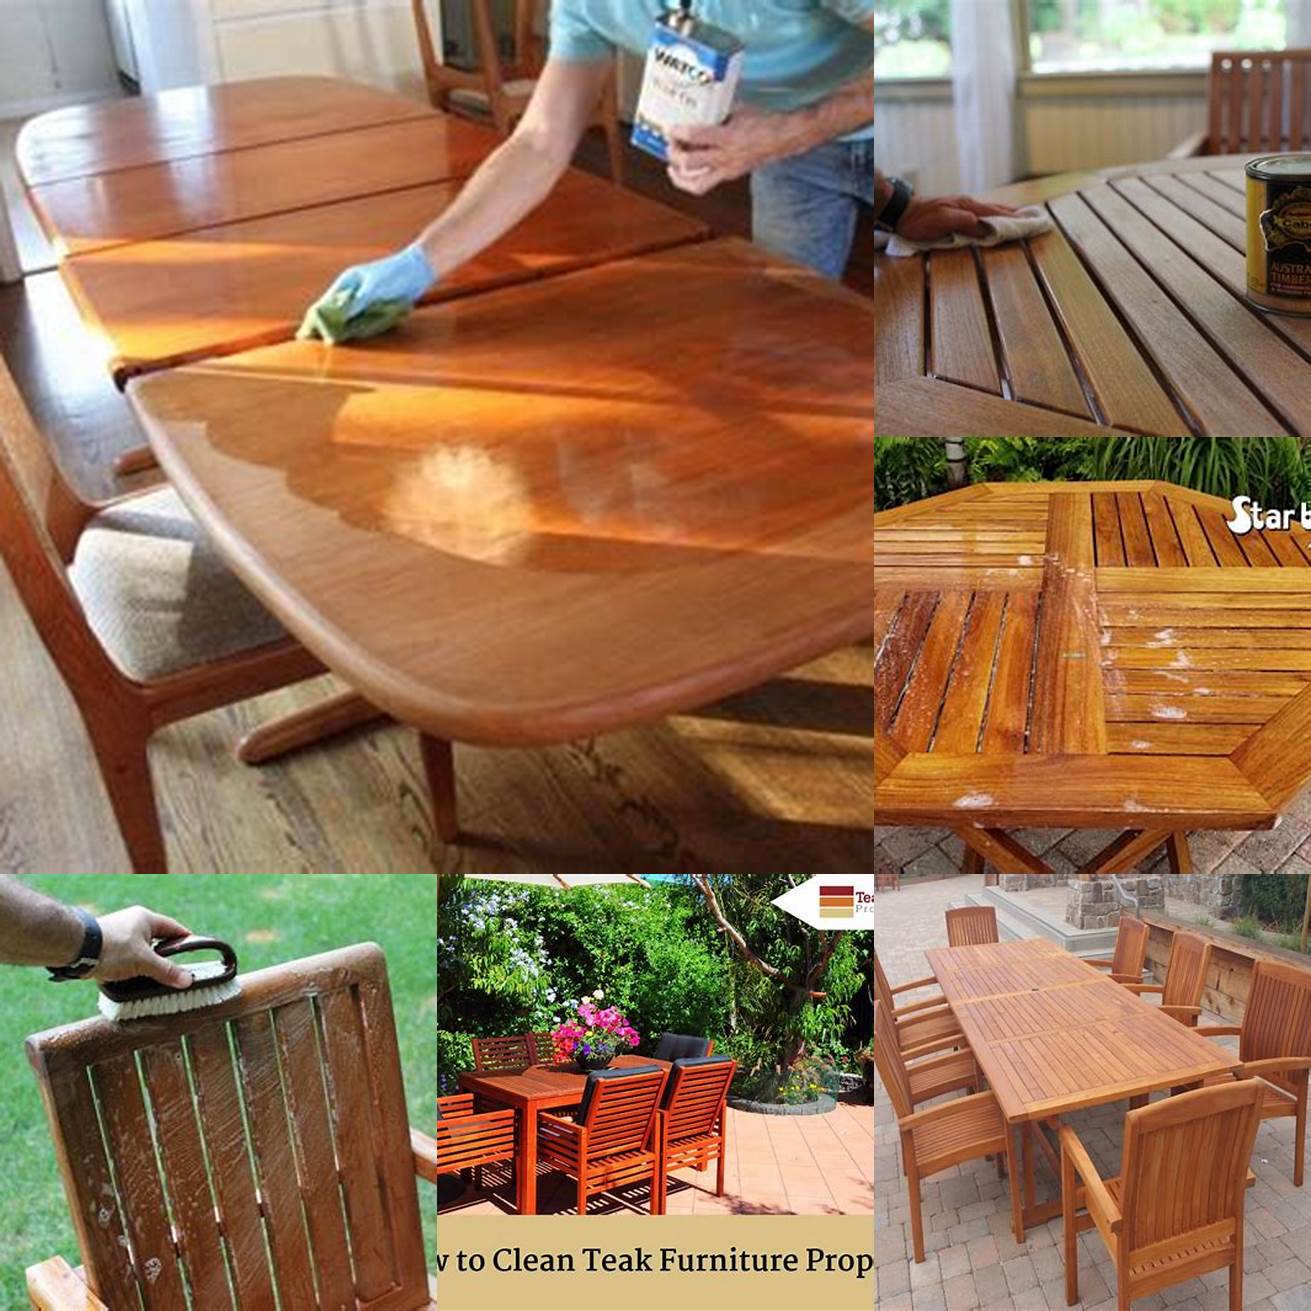 Cleaning Teak Dining Table with Mild Soap and Water